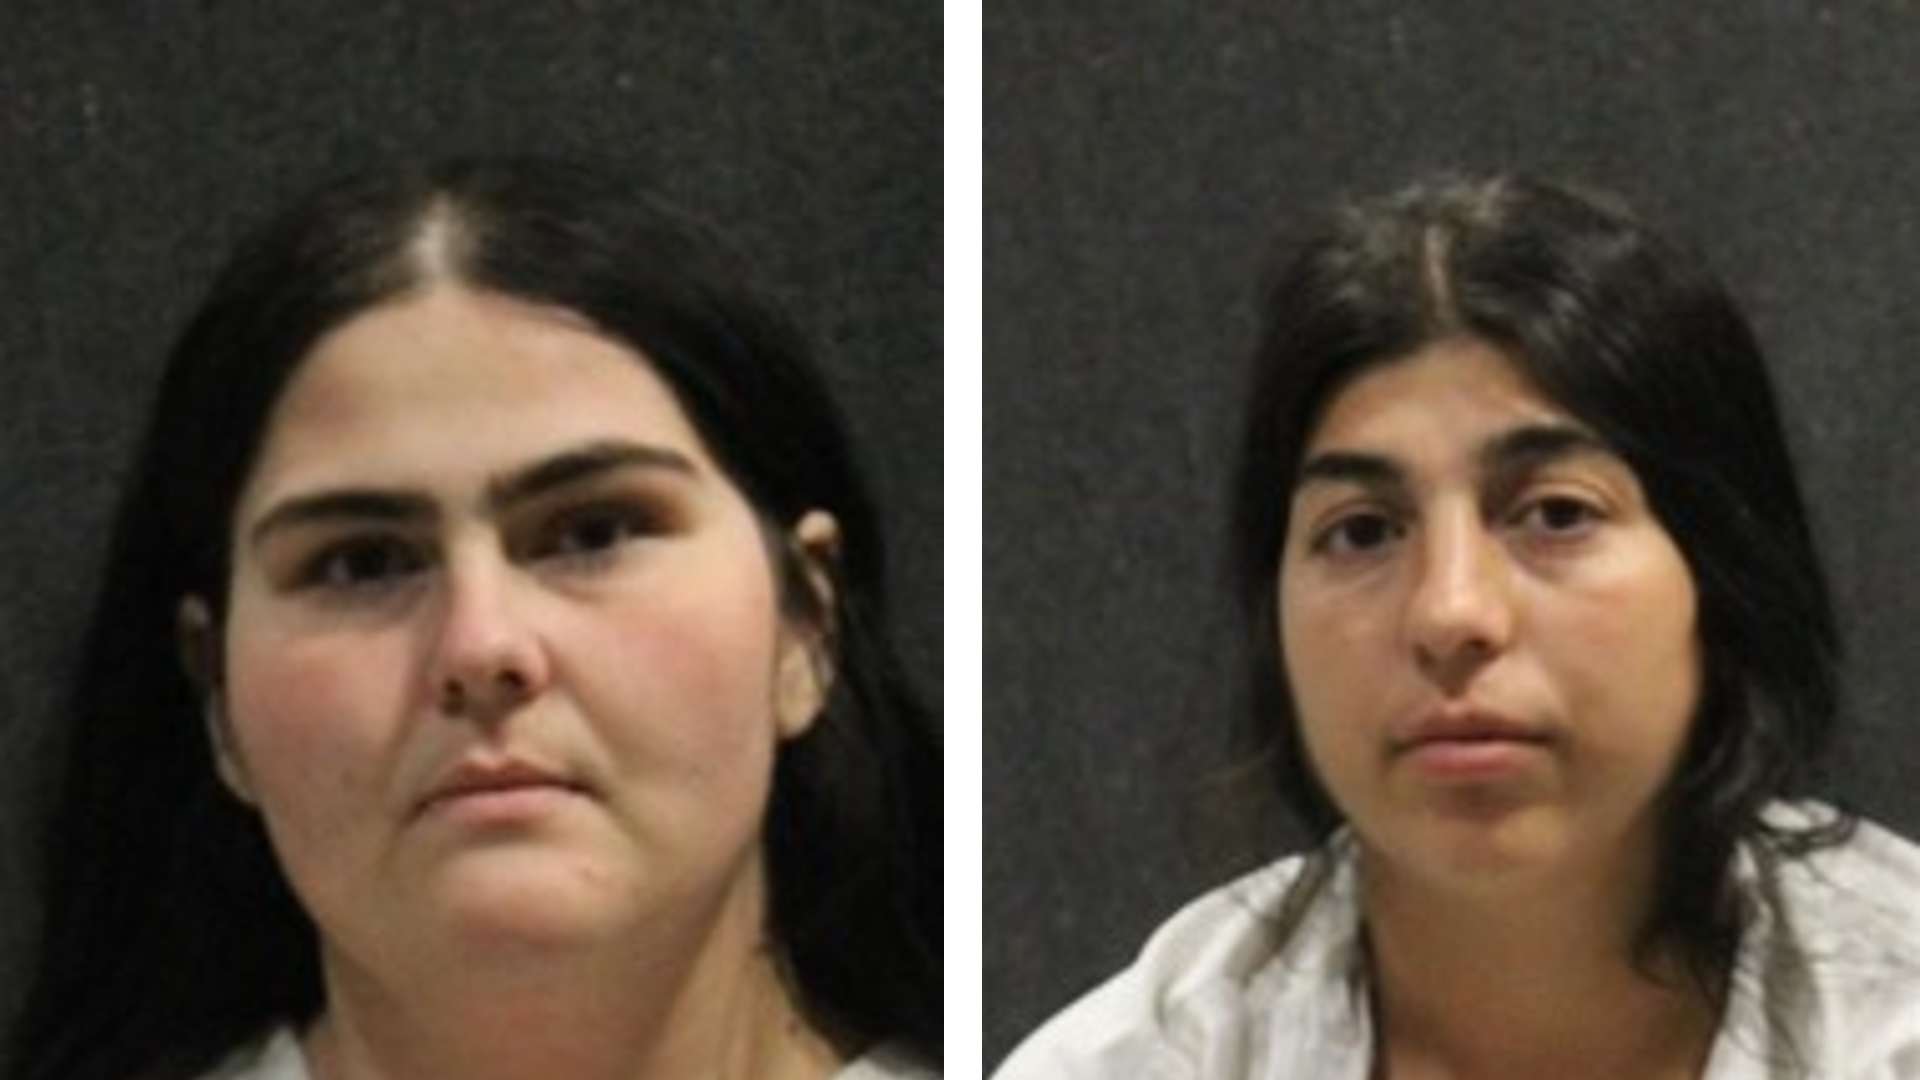 Franchesca Traila (left) and Dorinta Velcu (right) arrested for organized retail theft....